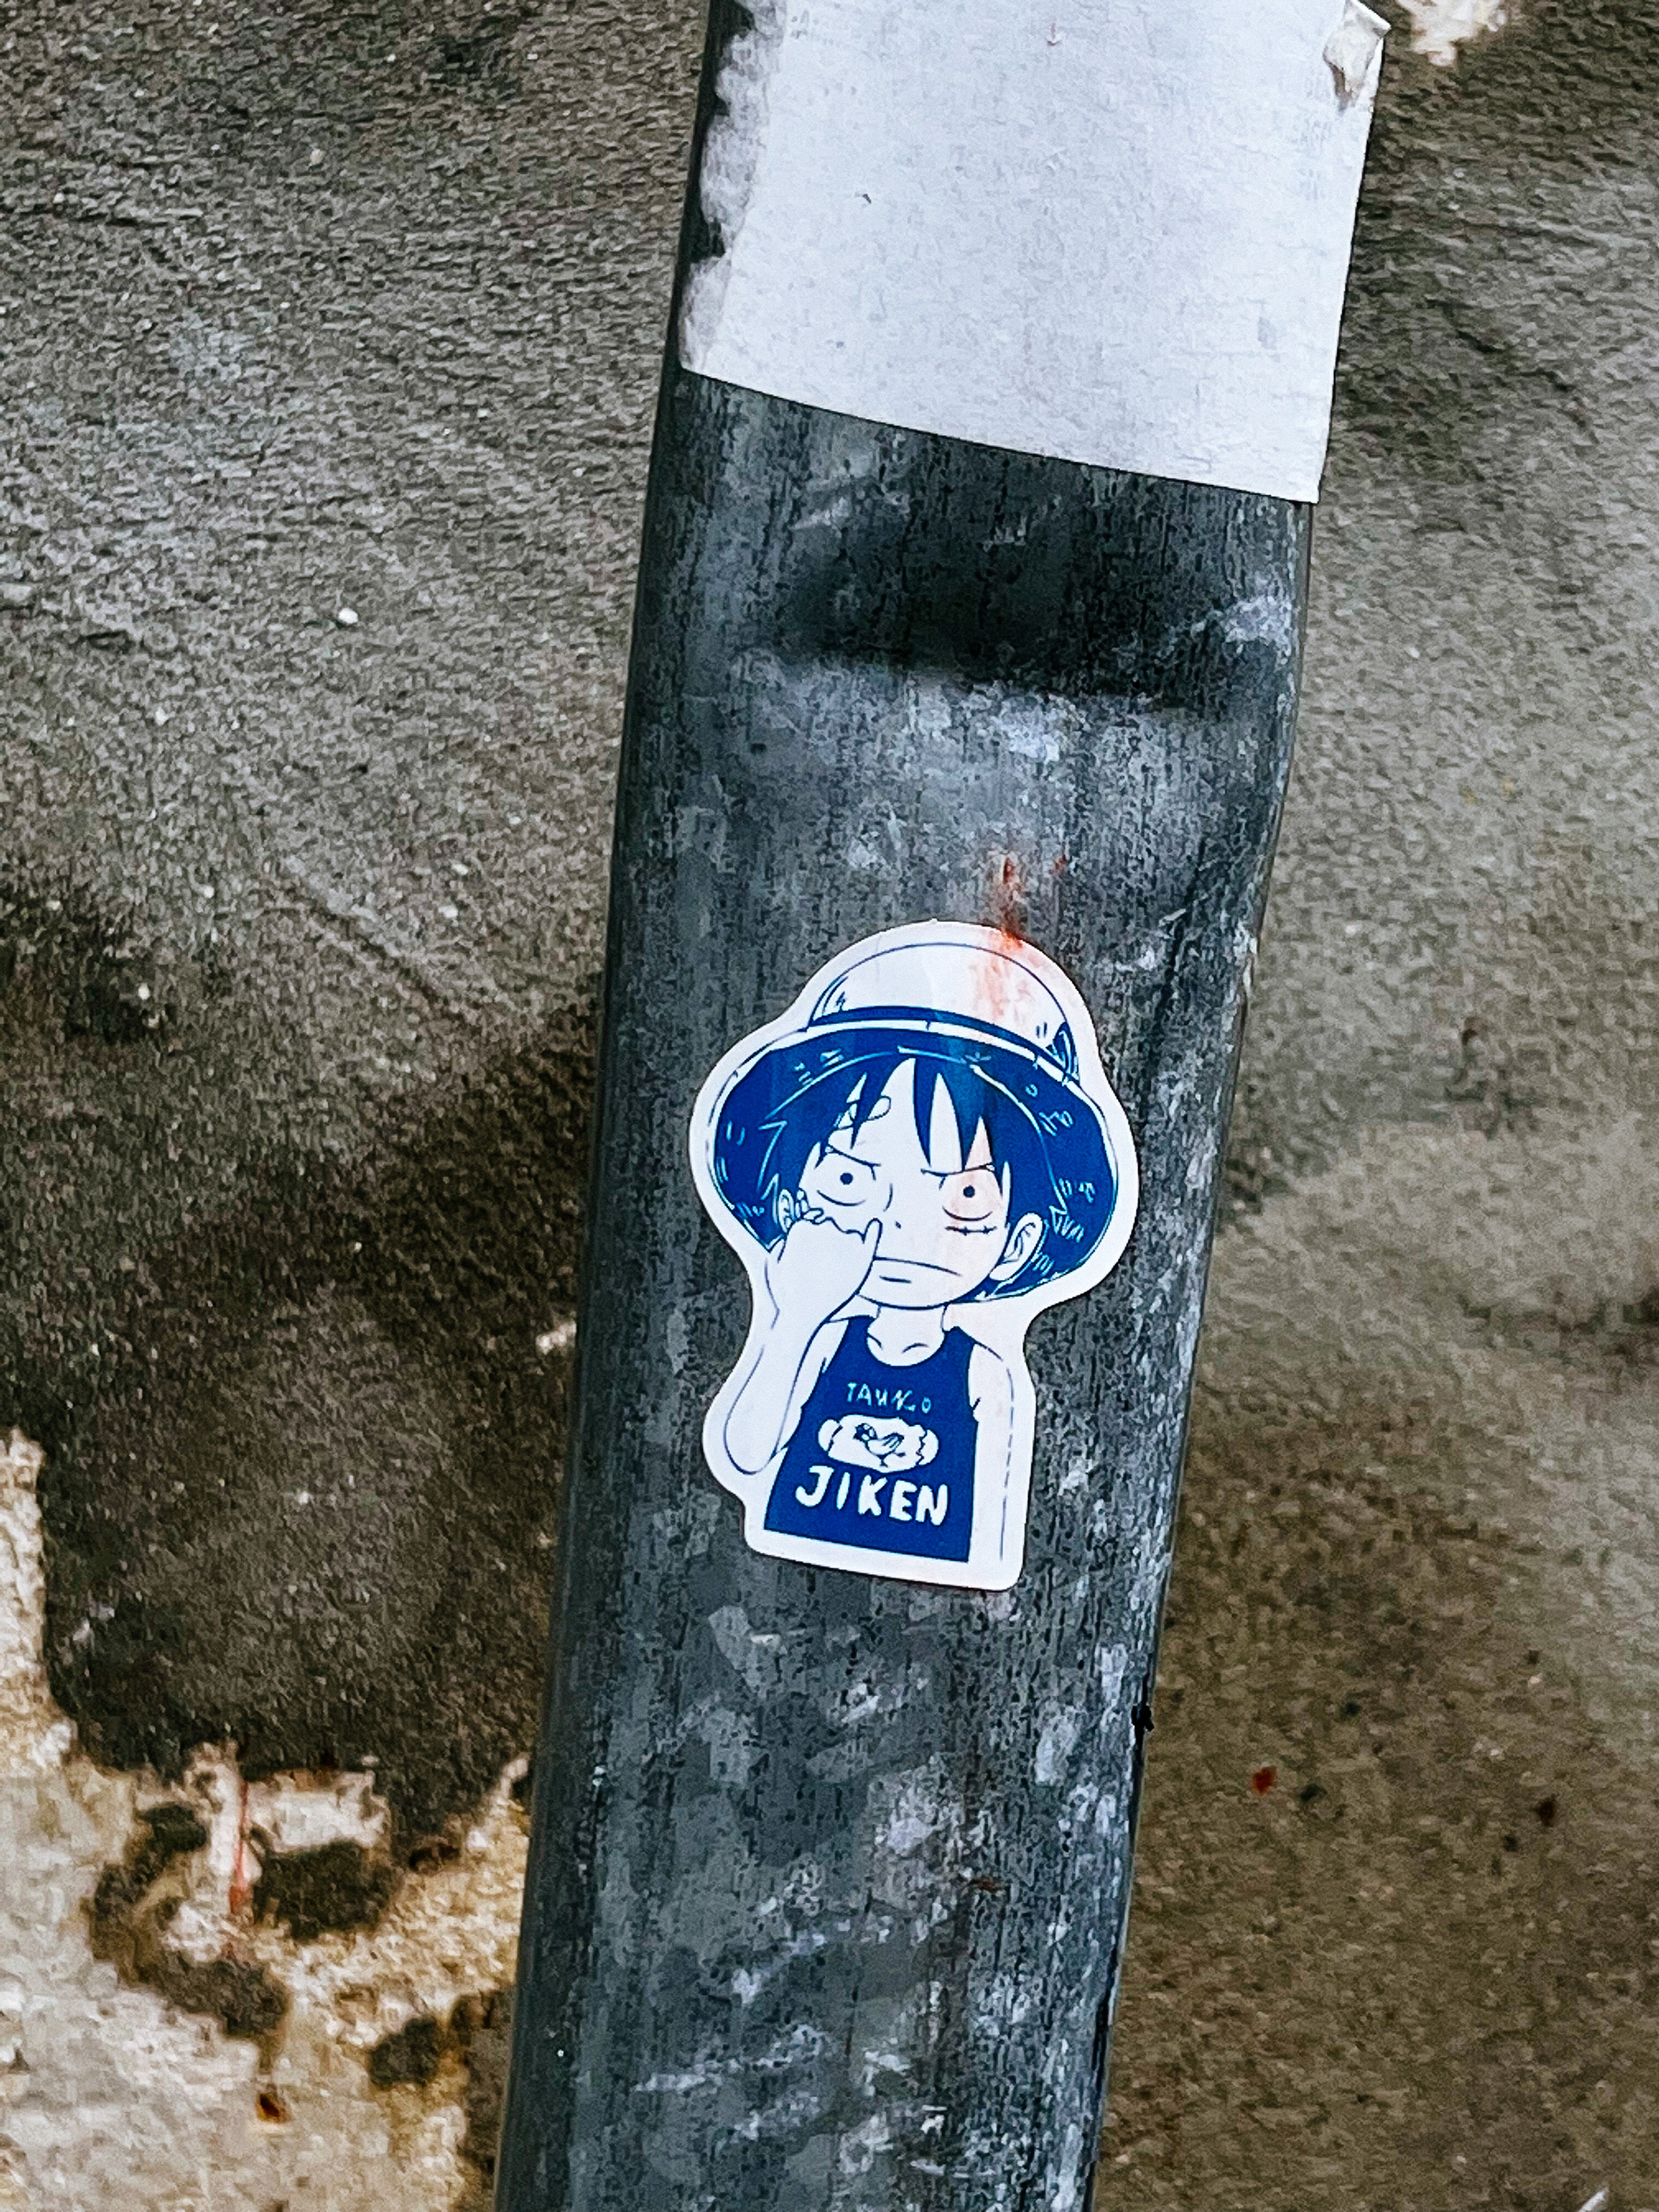 Sticker with a manga character, wearing a shirt with the word “Jiken”, and a hat. 